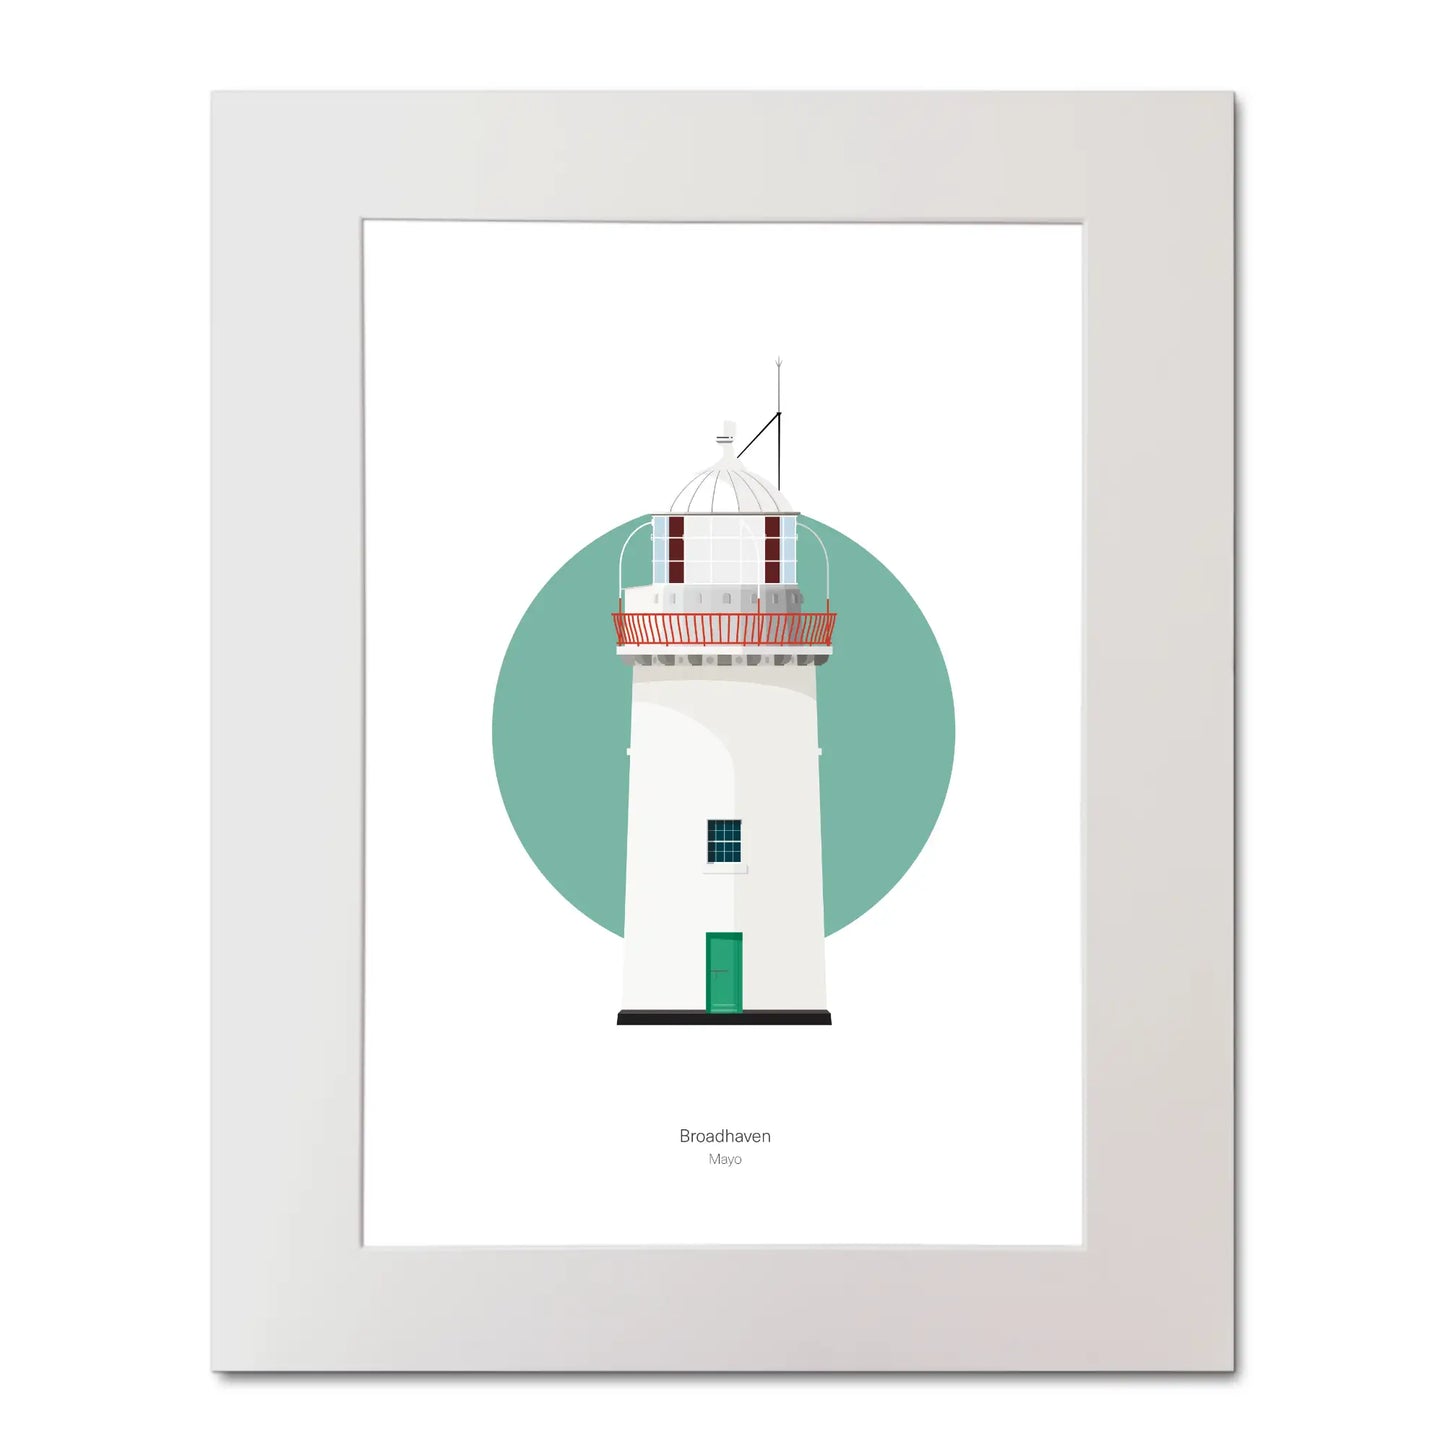 Illustration of Broadhaven lighthouse on a white background inside light blue square, mounted and measuring 40x50cm.